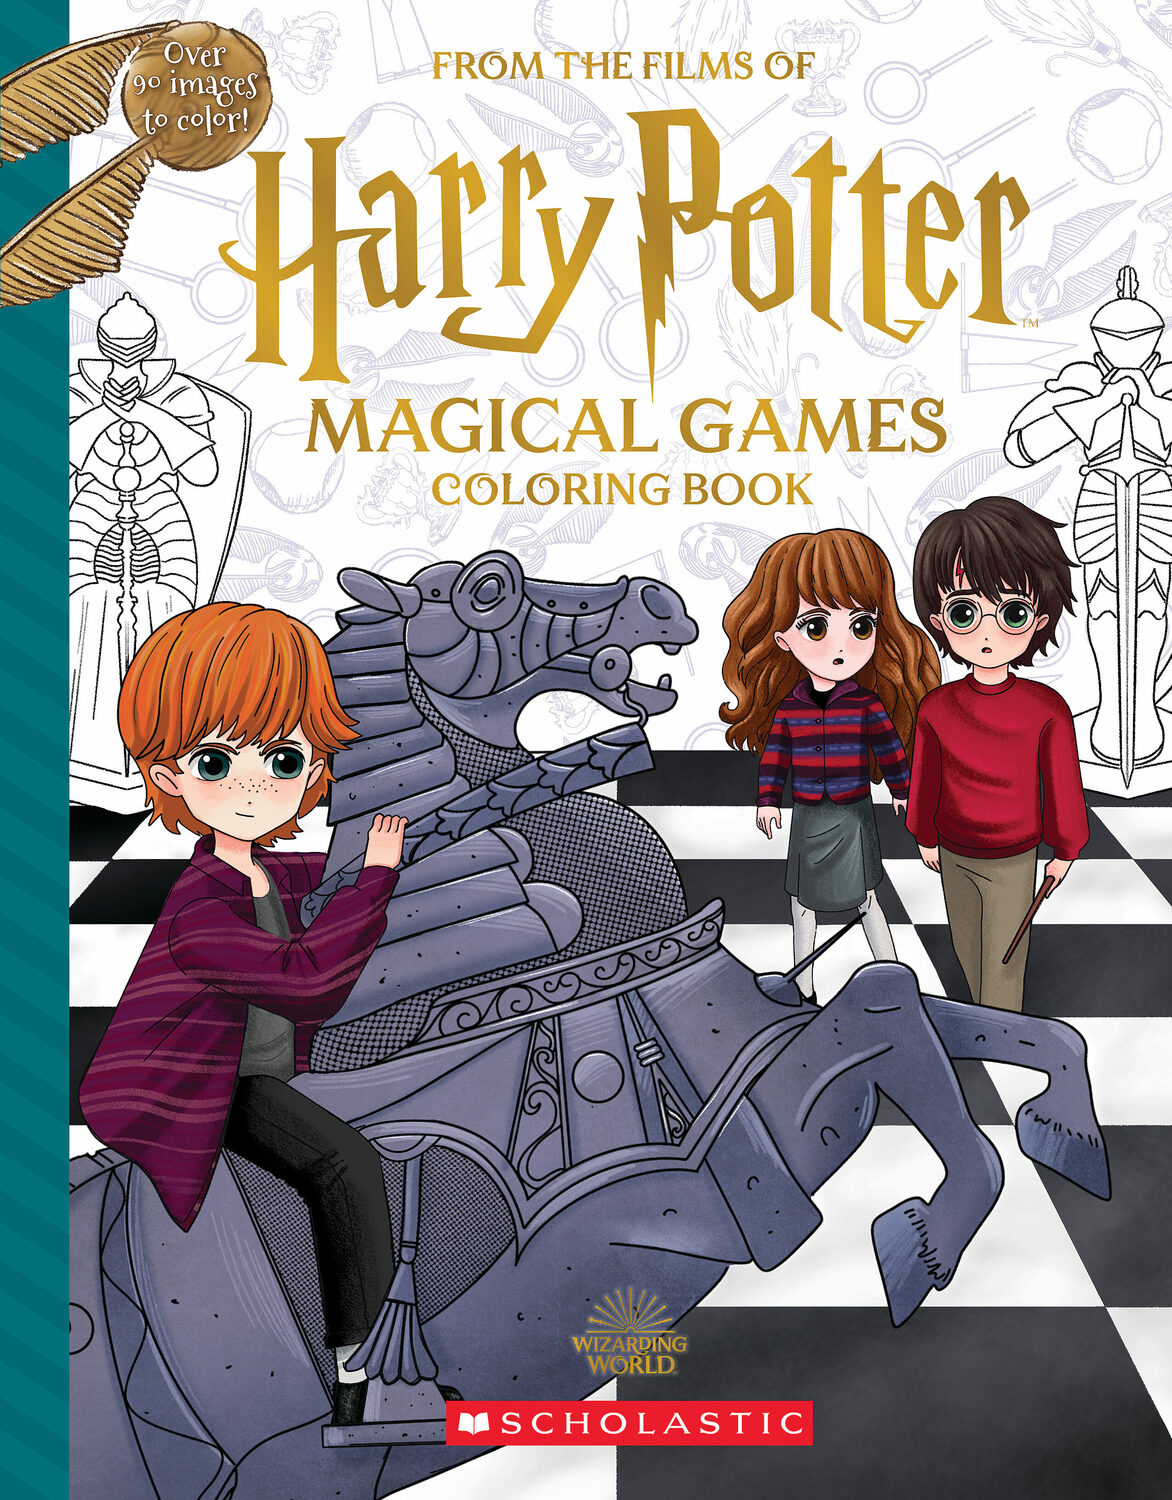 Magical Games Coloring Book (Harry Potter) [Book]